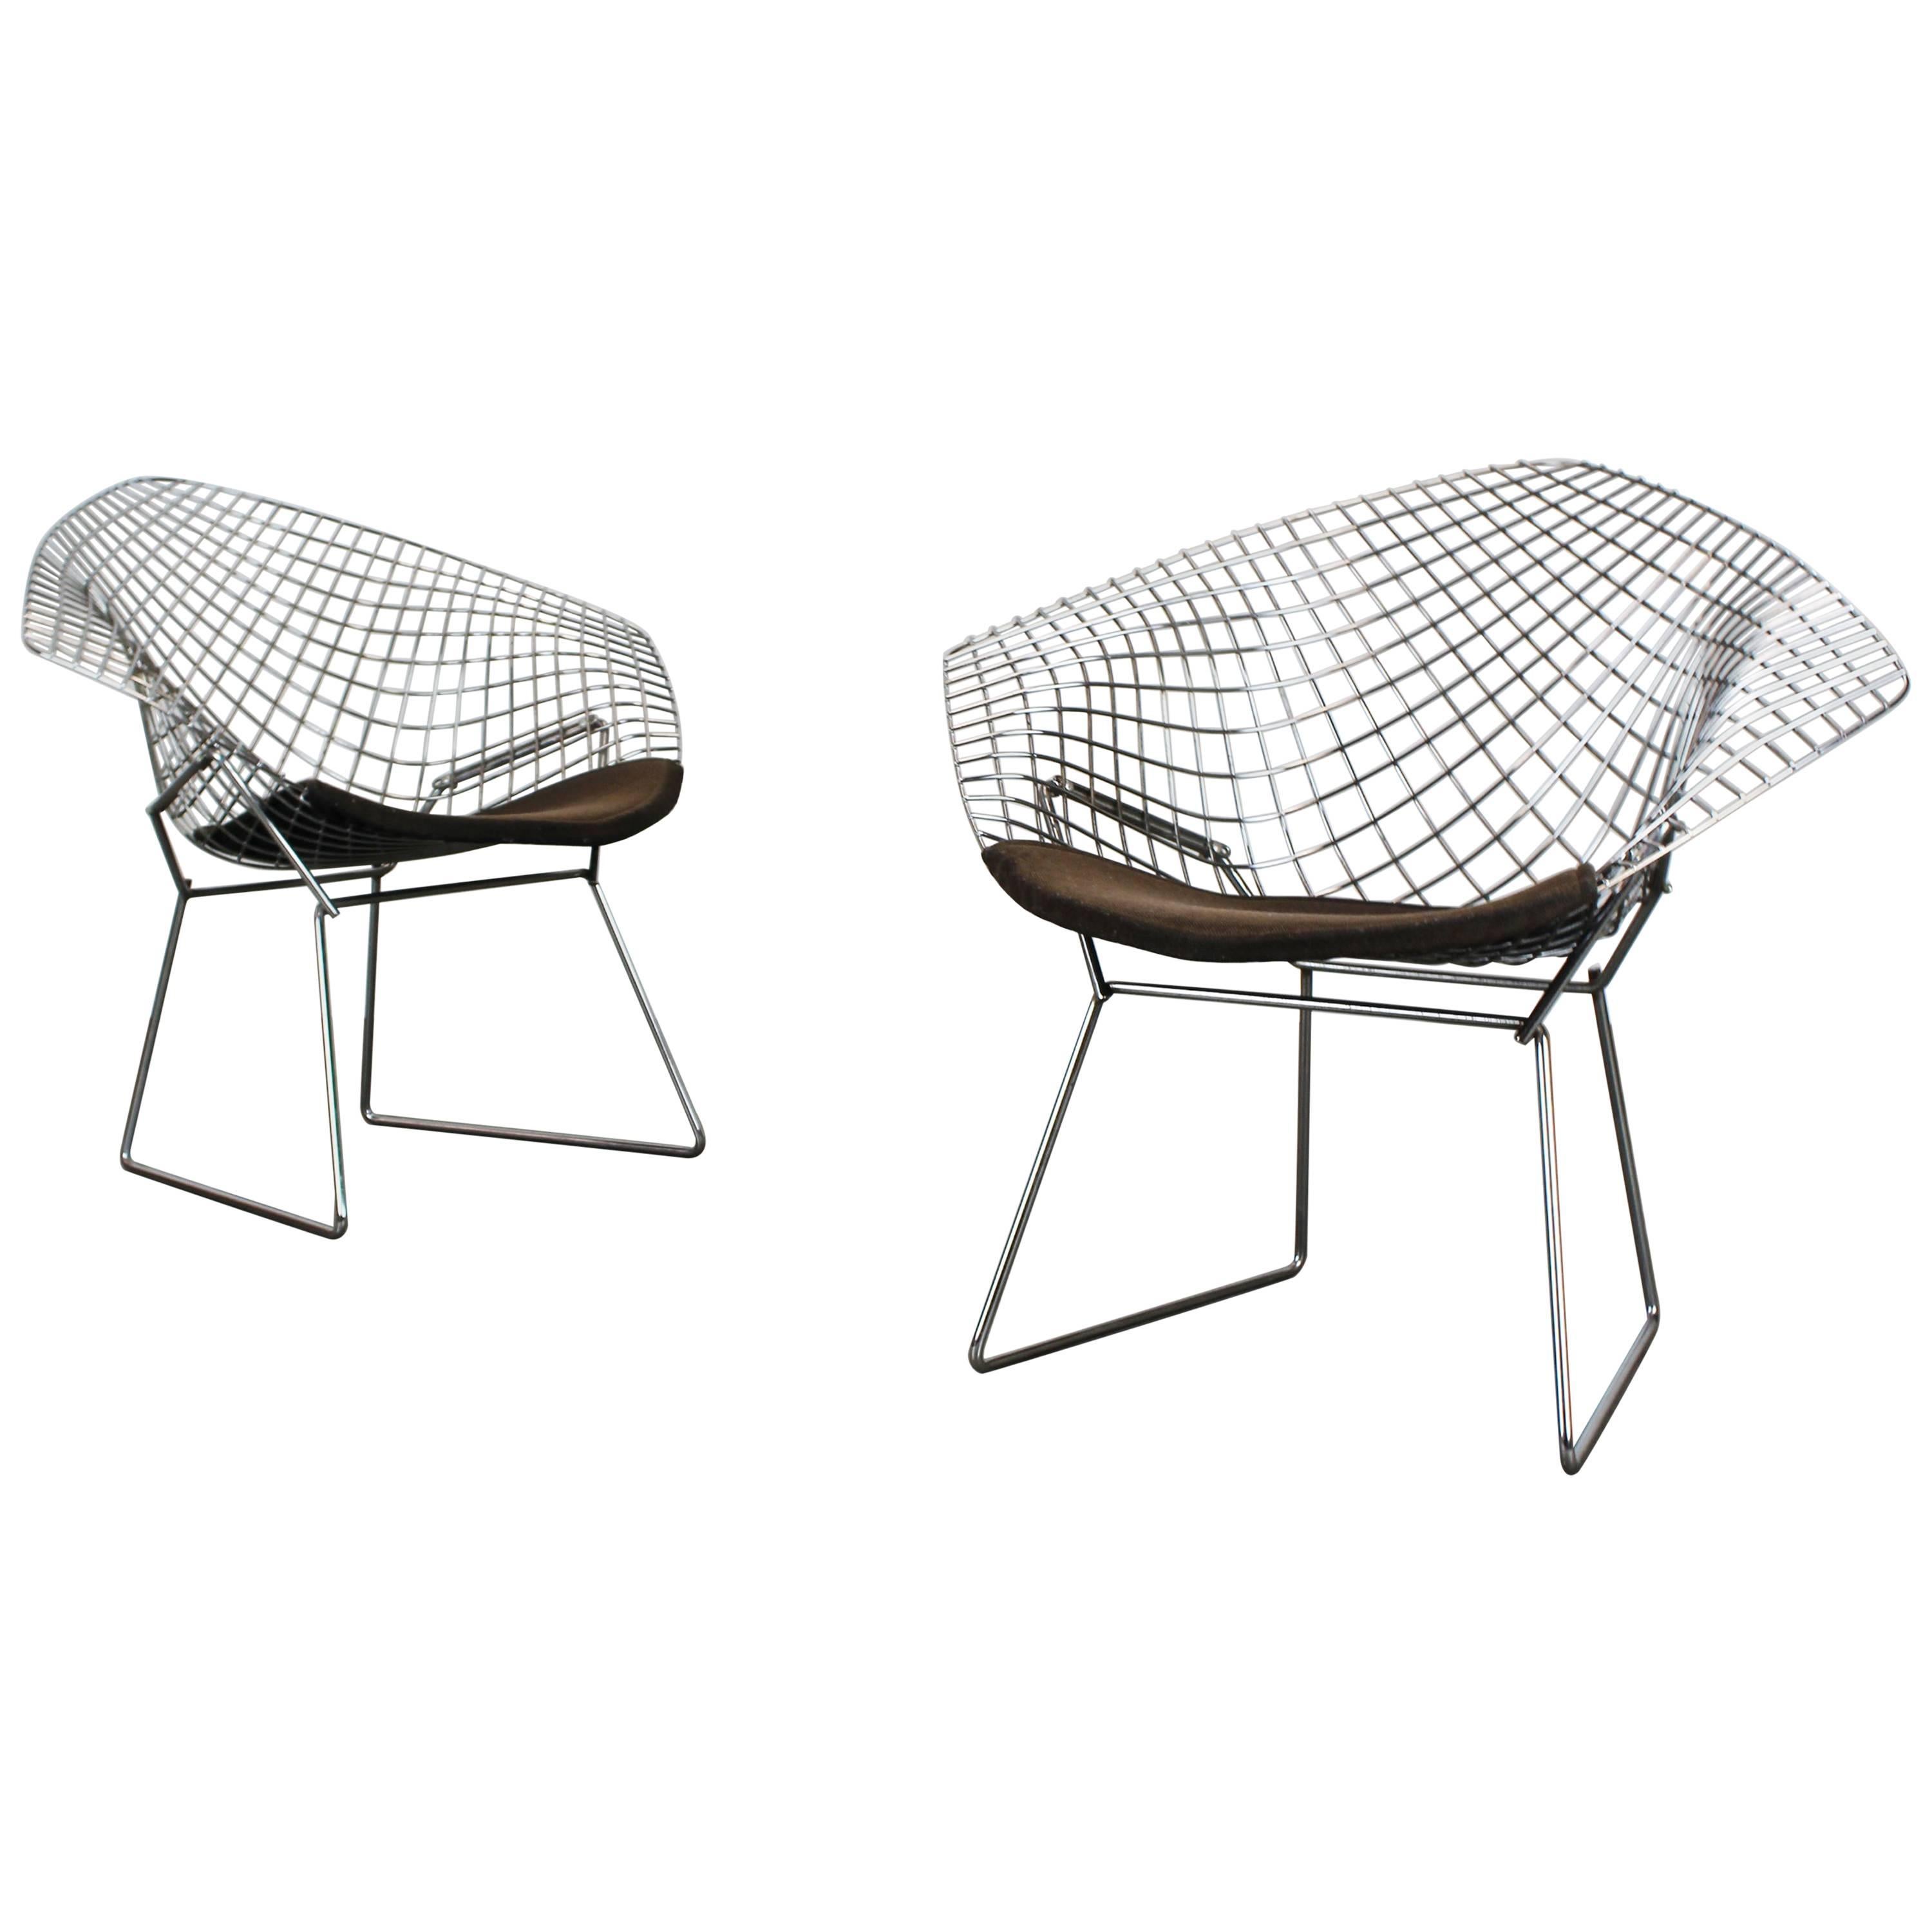 Set of Two Chrome Diamond Chairs by Harry Bertoia for Knoll, 1970, Grey